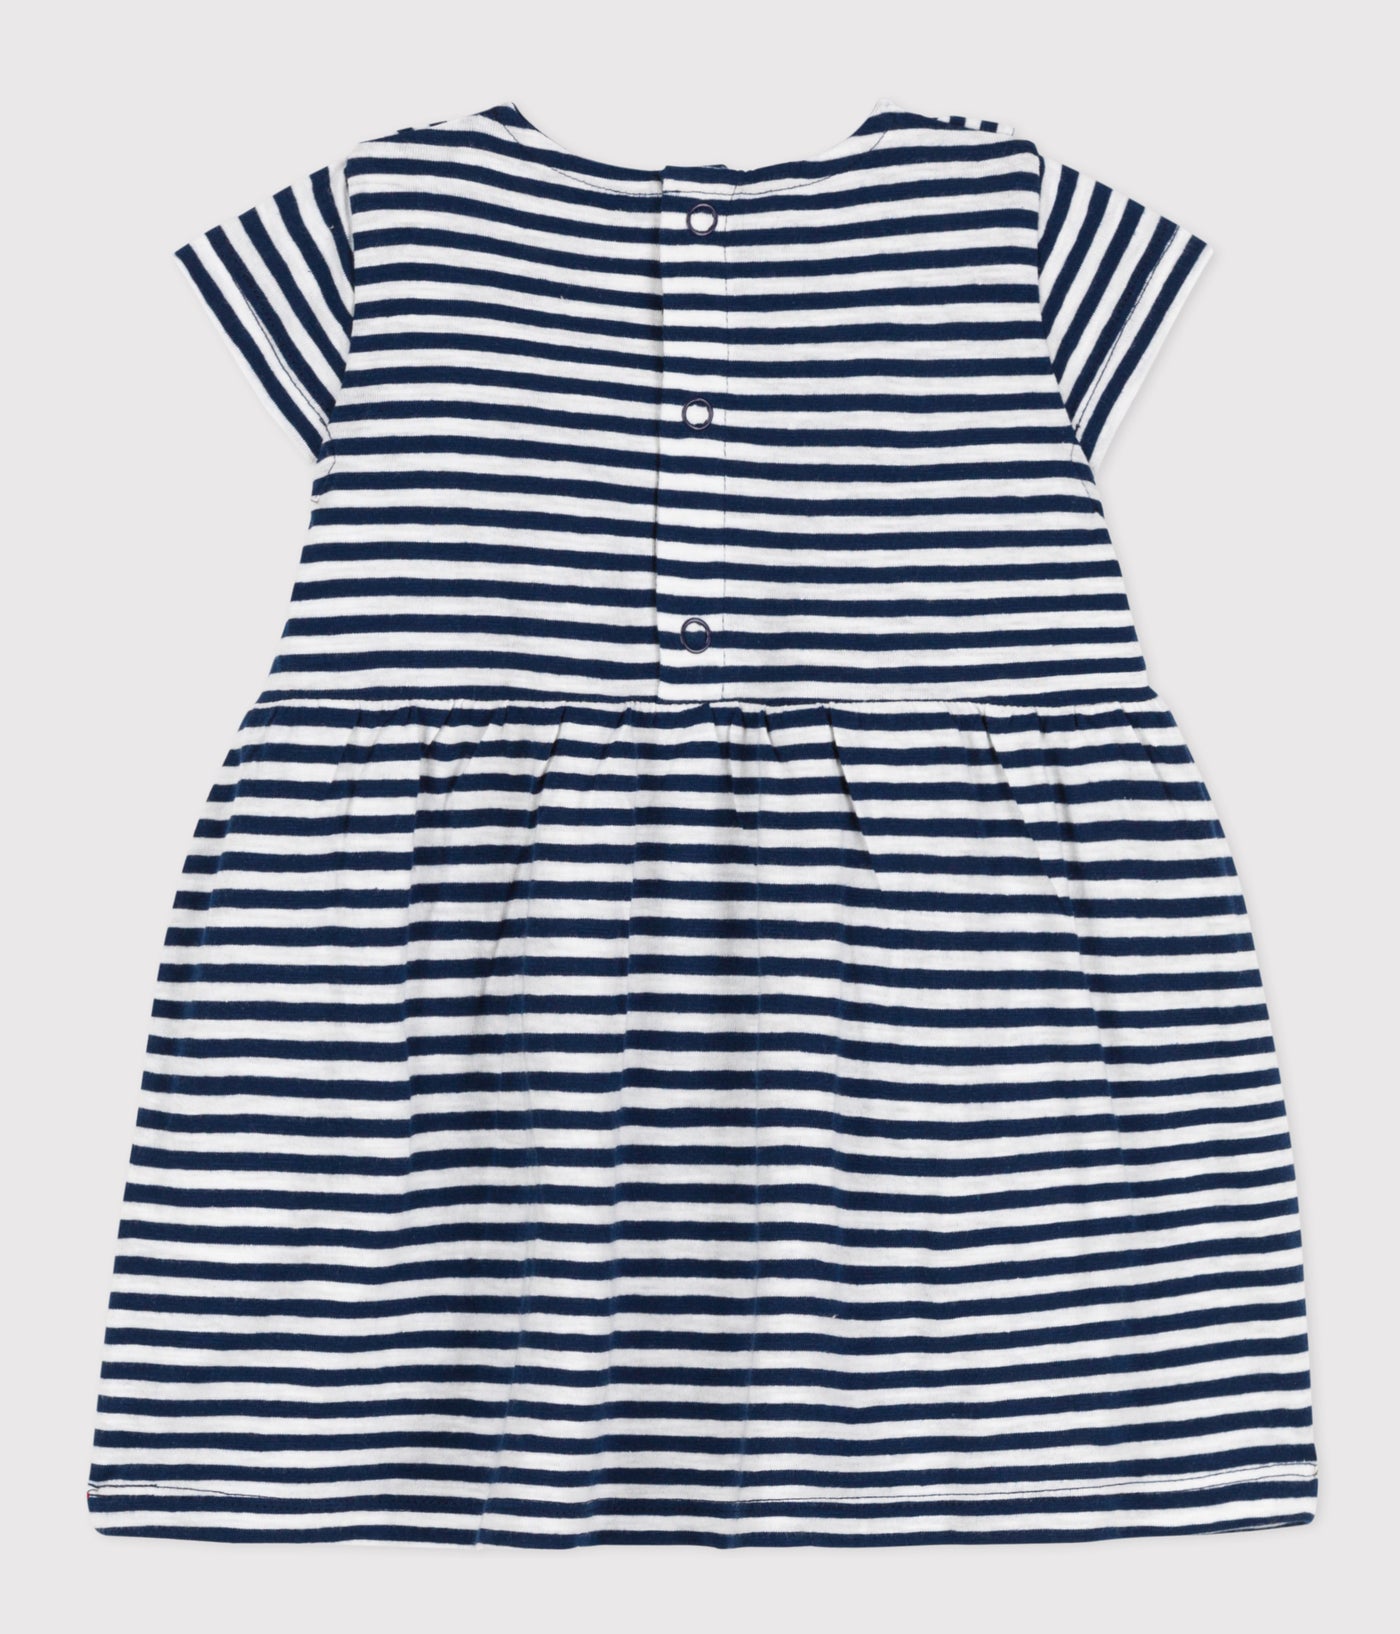 Petit Bateau STRIPED DRESS MADE OF SLUB JERSEY: A SOFT FABRIC WITH SOME TEXTURE THAT'S PERFECT FOR SUMMER.<br>There are lovely vertical ruffles on each side.<br>Poppers on the back: handy when getting baby dressed.<br>The perfect gift!